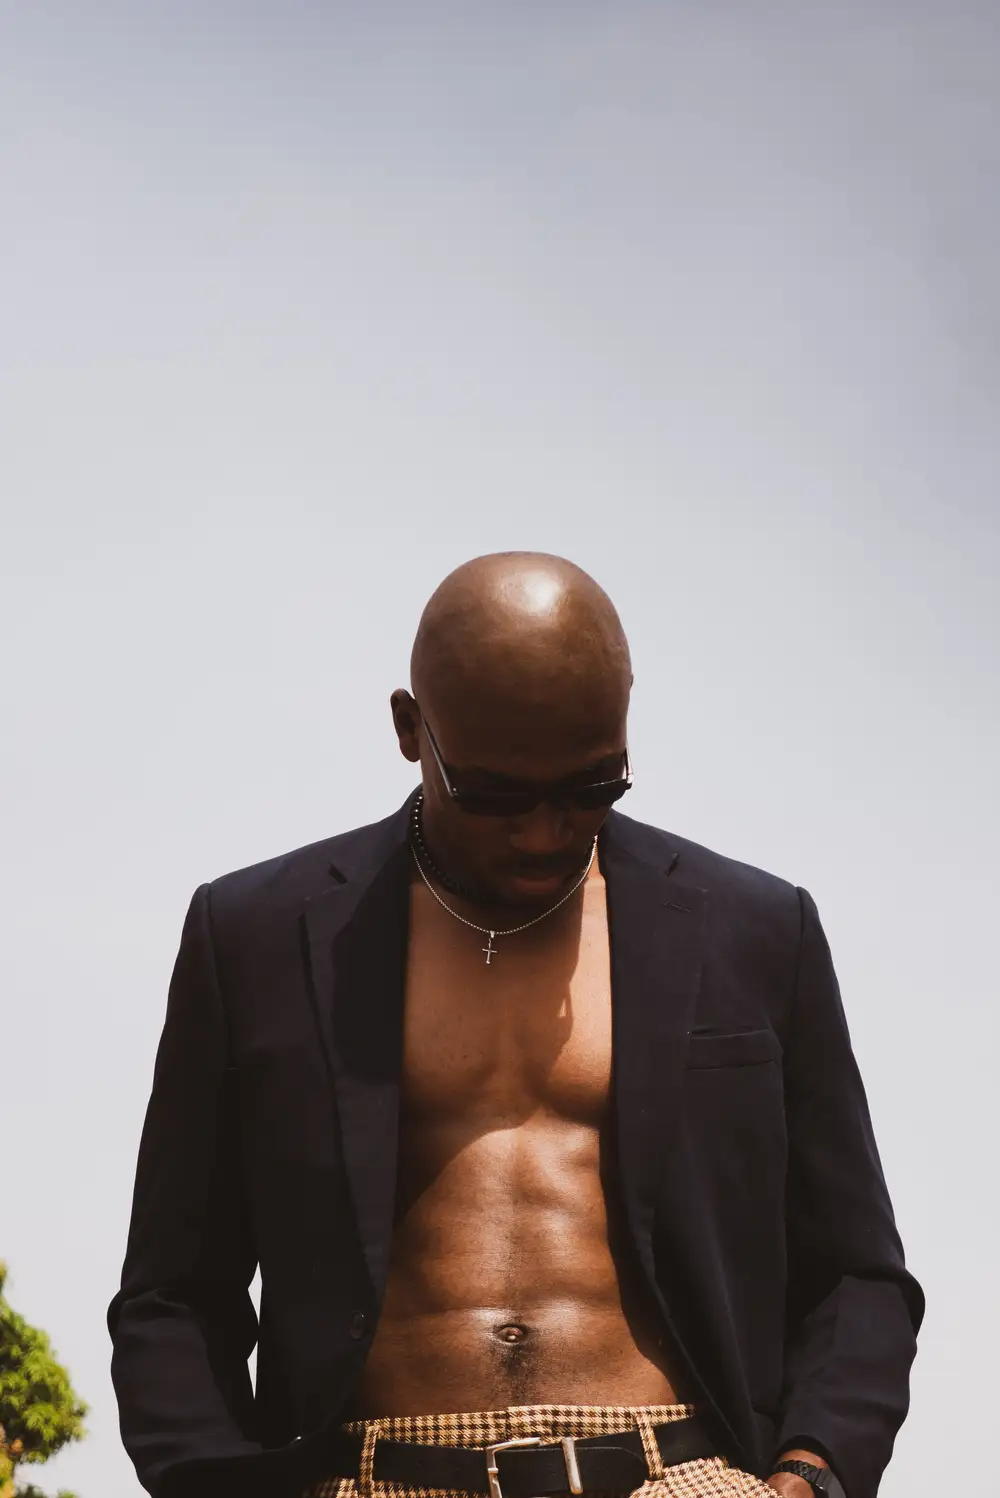 Bare chested black man in cool suit